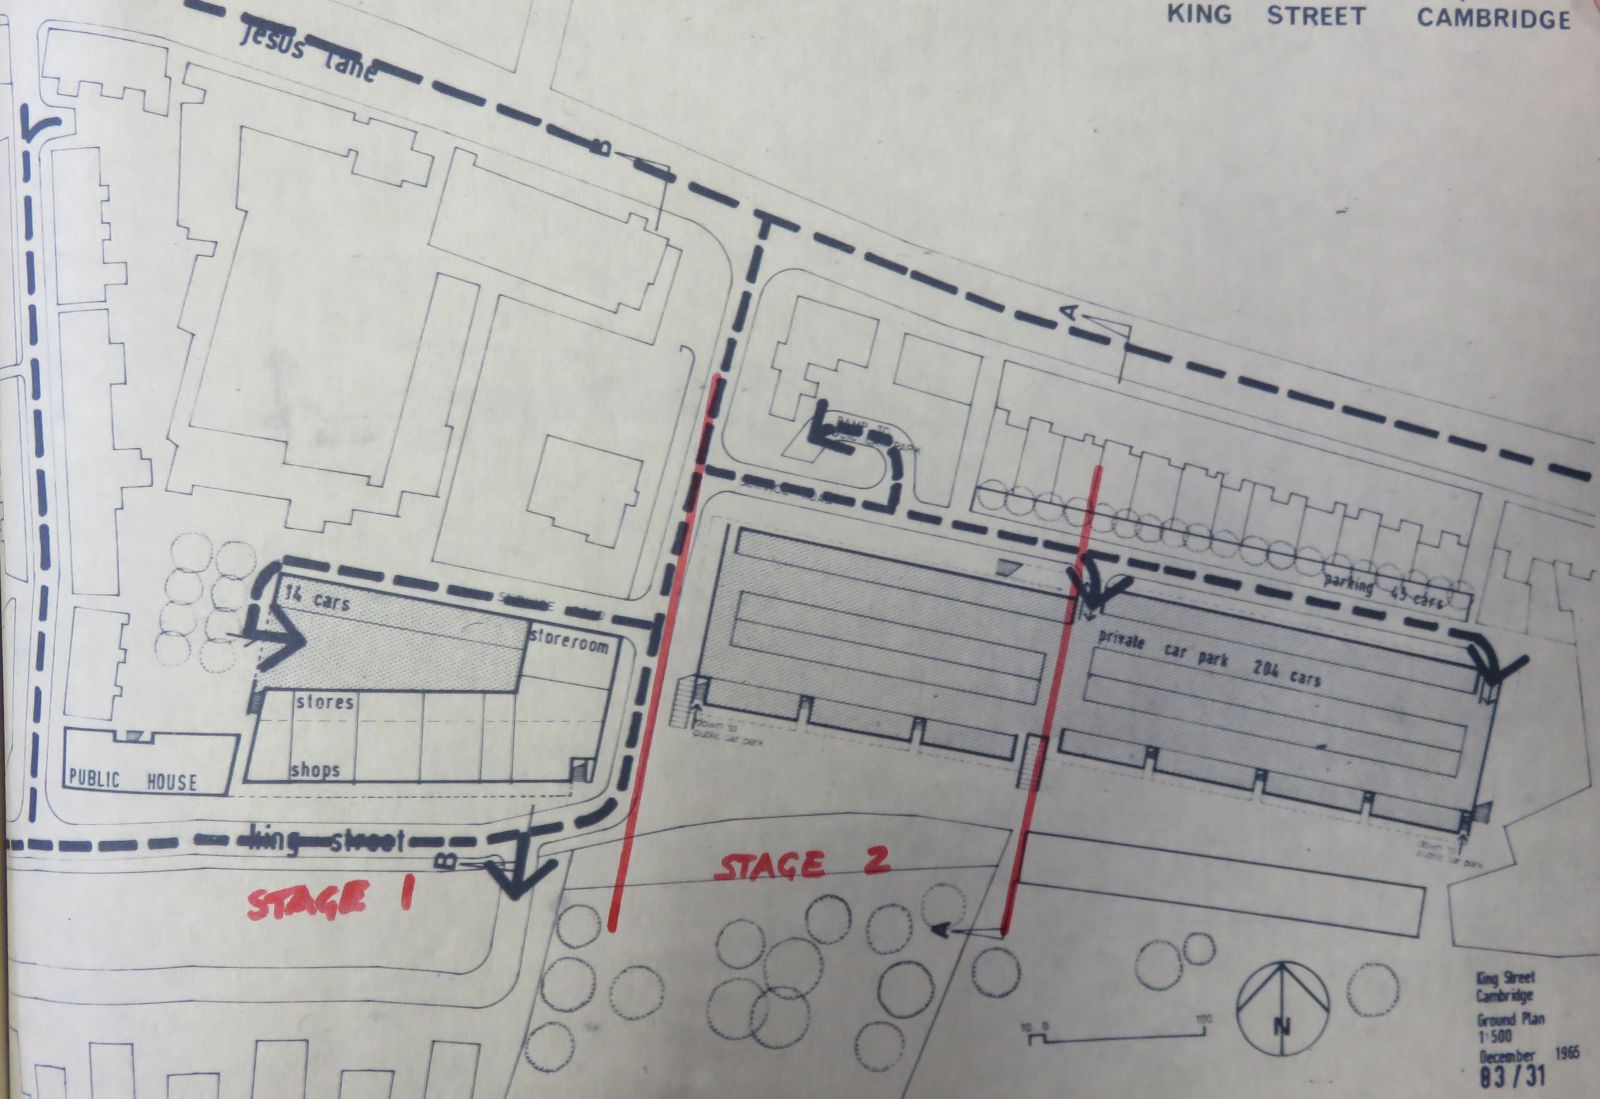 Annotated plan of early proposal for redevelopment of King Street. (Archive ref: JCAD-3-CAM-MALC-DEV-1-1965-17)